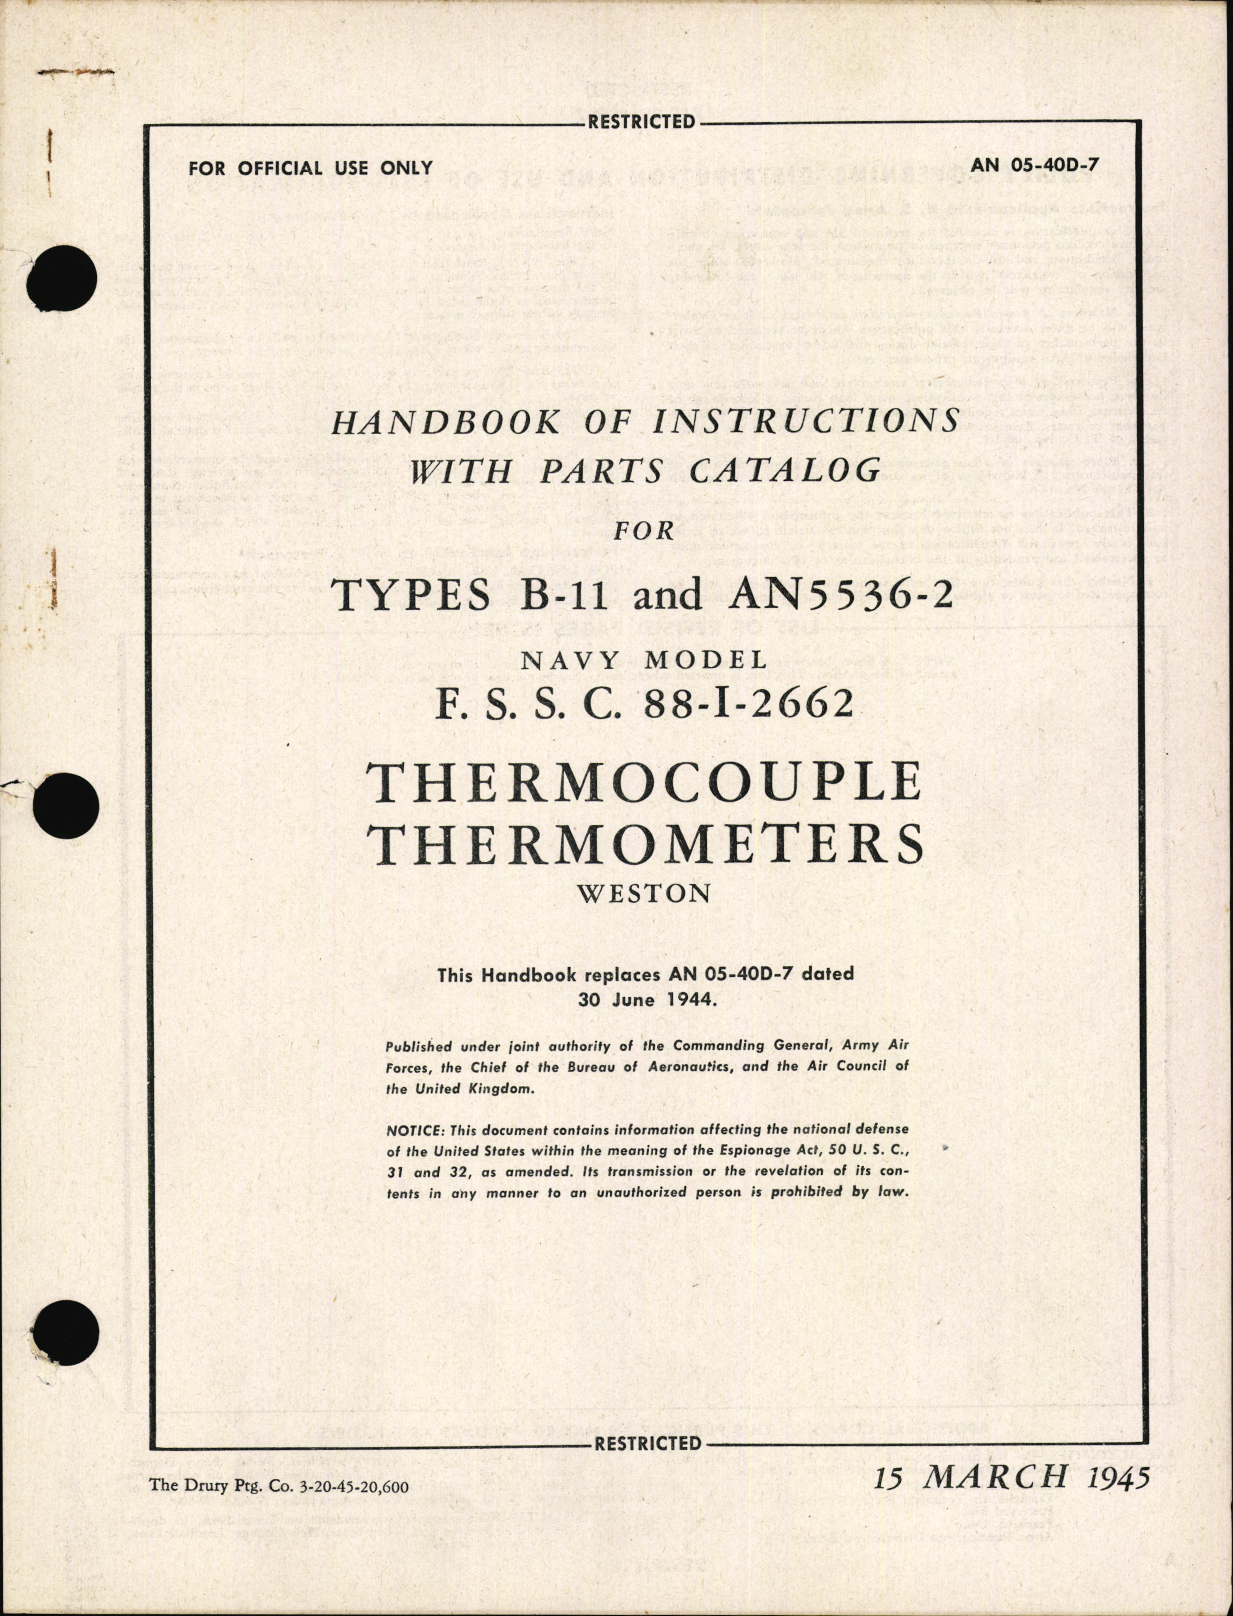 Sample page 1 from AirCorps Library document: Handbook of Instructions with Parts Catalog for Thermocouple Thermometers